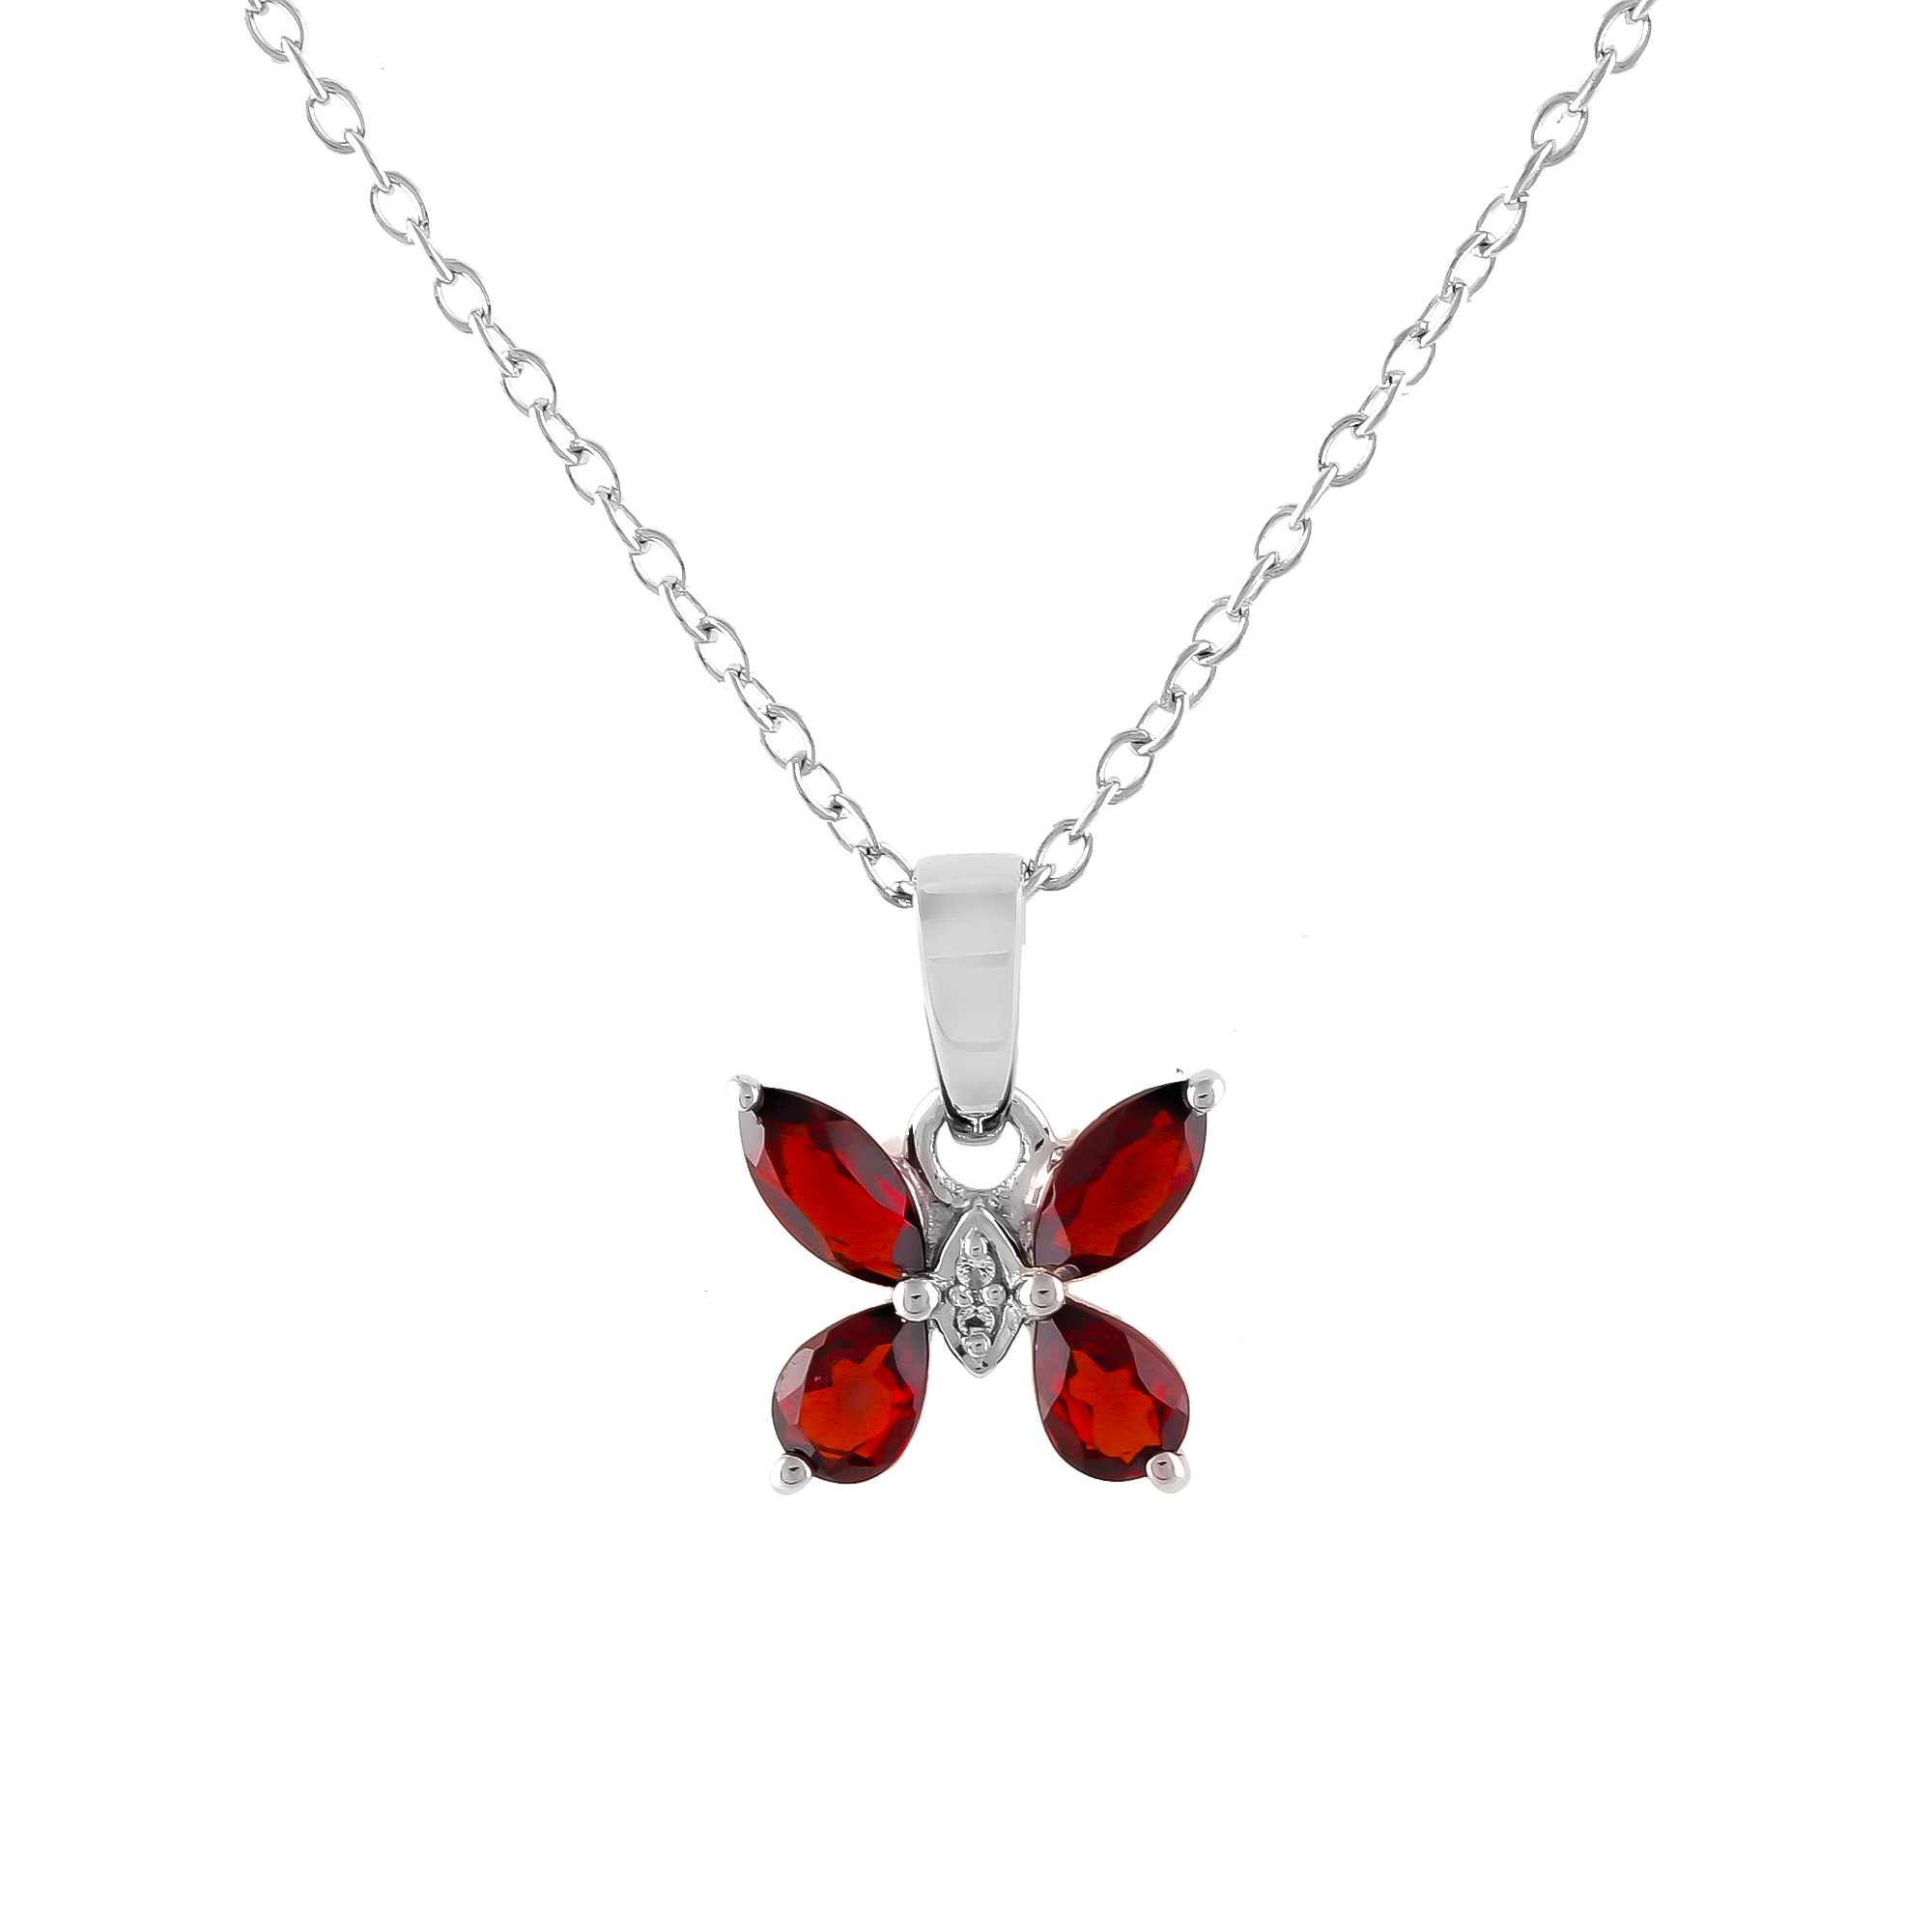 Butterfly pendant in Garnet with Chain